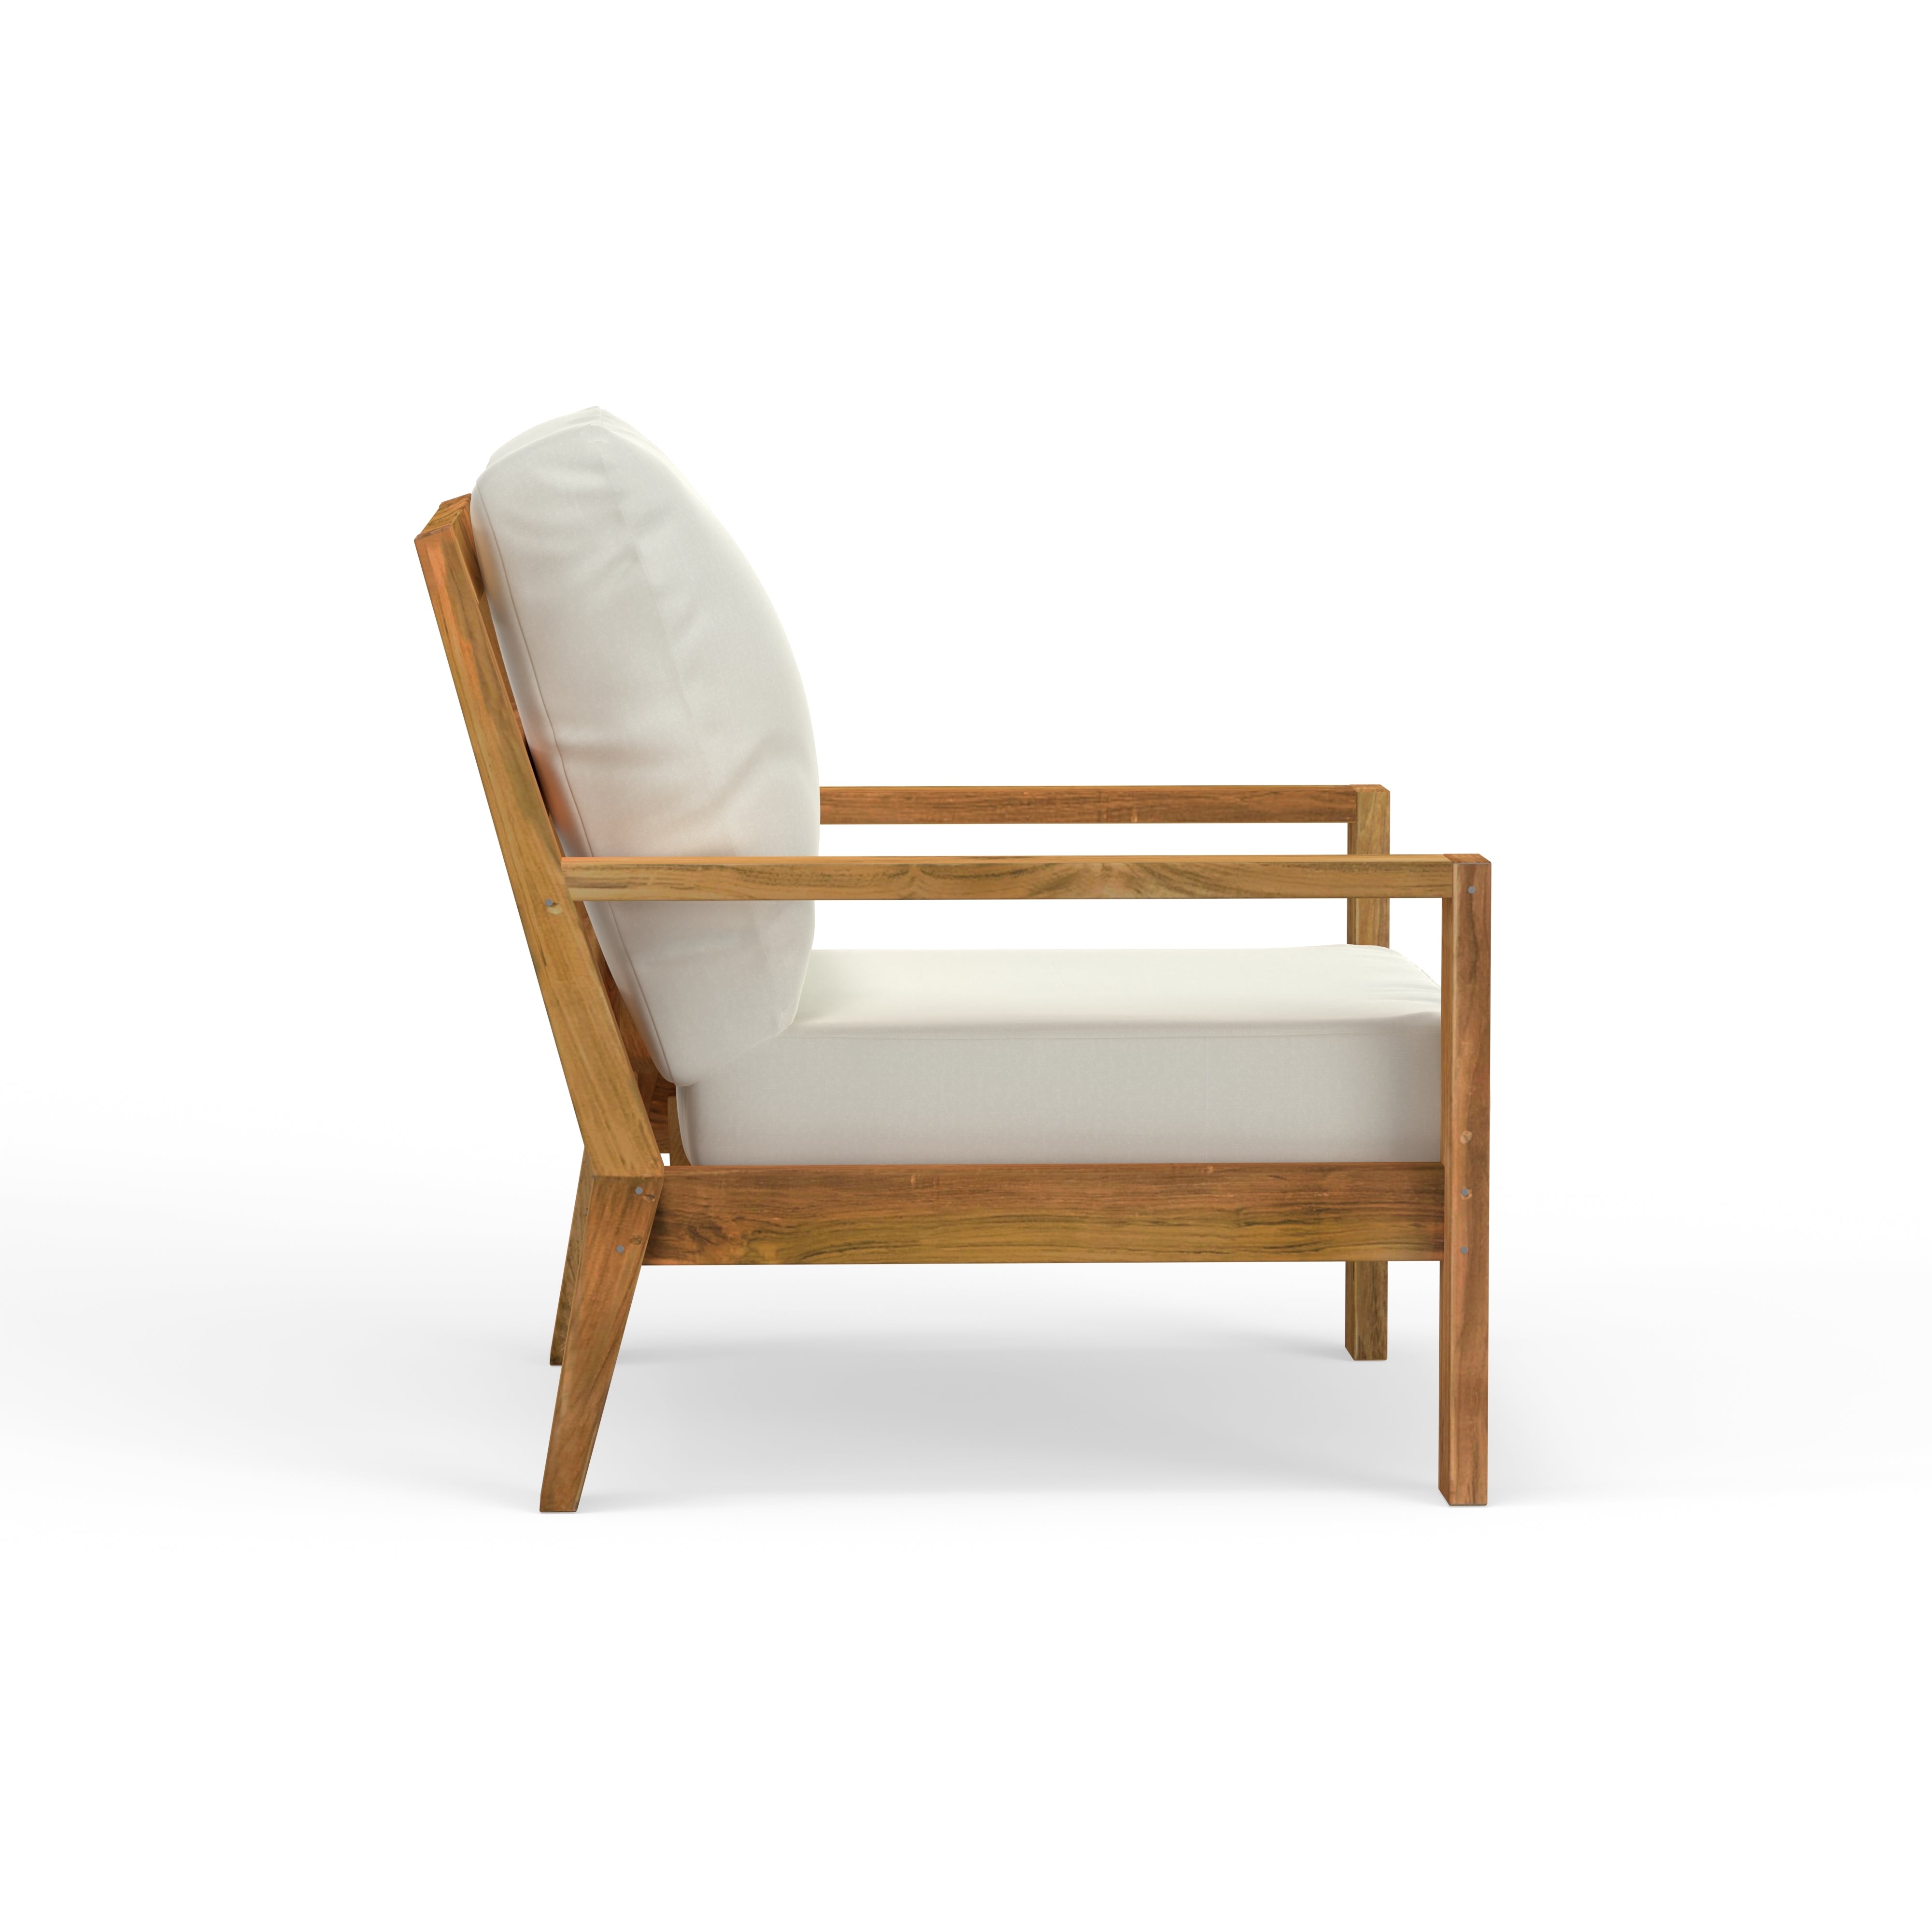 Teak Outdoor Chairs That Will Last A Lifetime